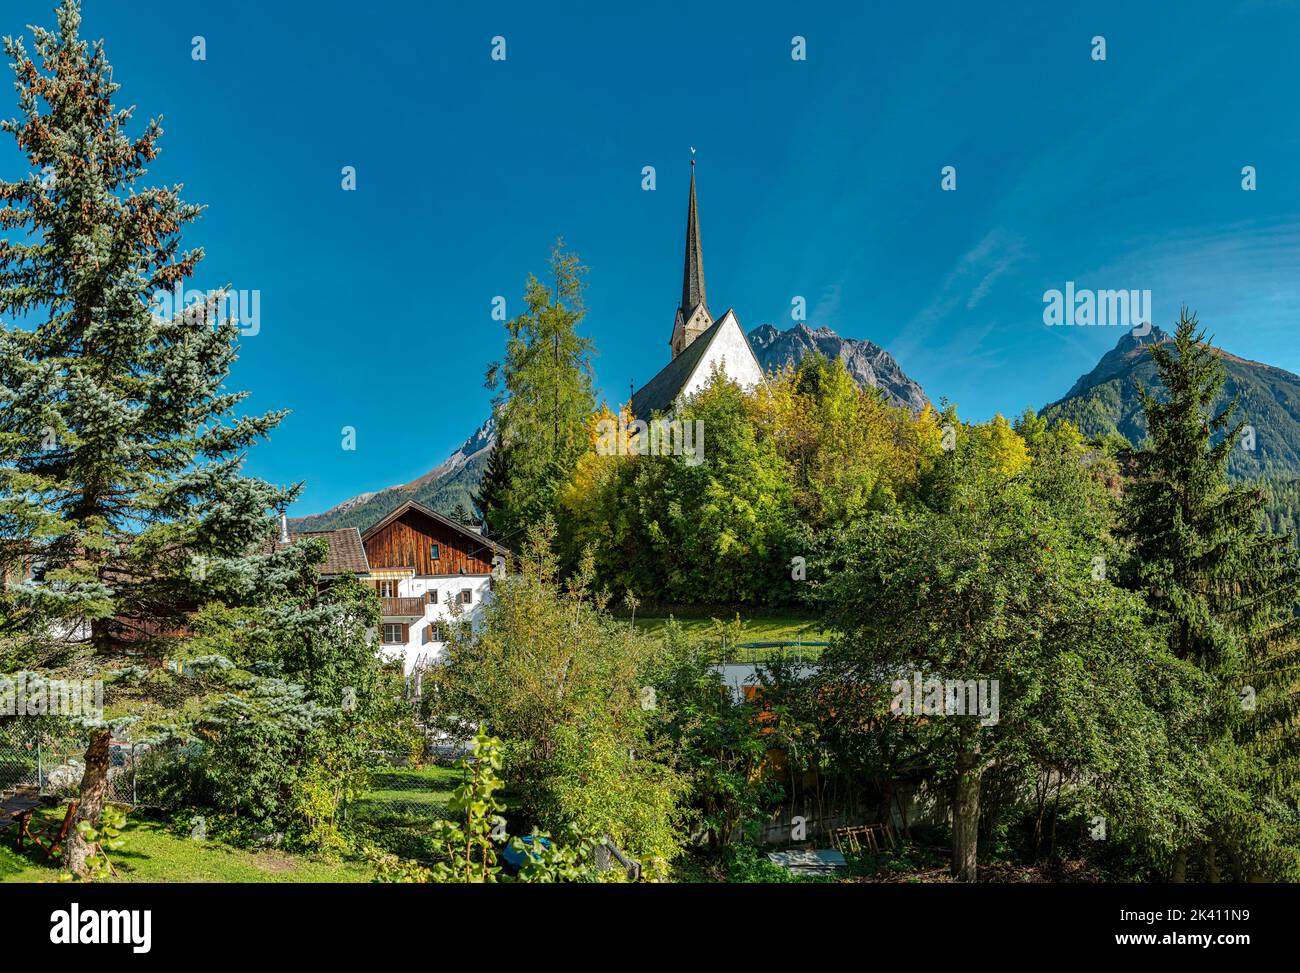 Church on top of a hill almost hidden by trees *** Local Caption ***  Scuol,  Graubünden, Switzerland, church, monestry, forest, wood, trees, autumn, Stock Photo